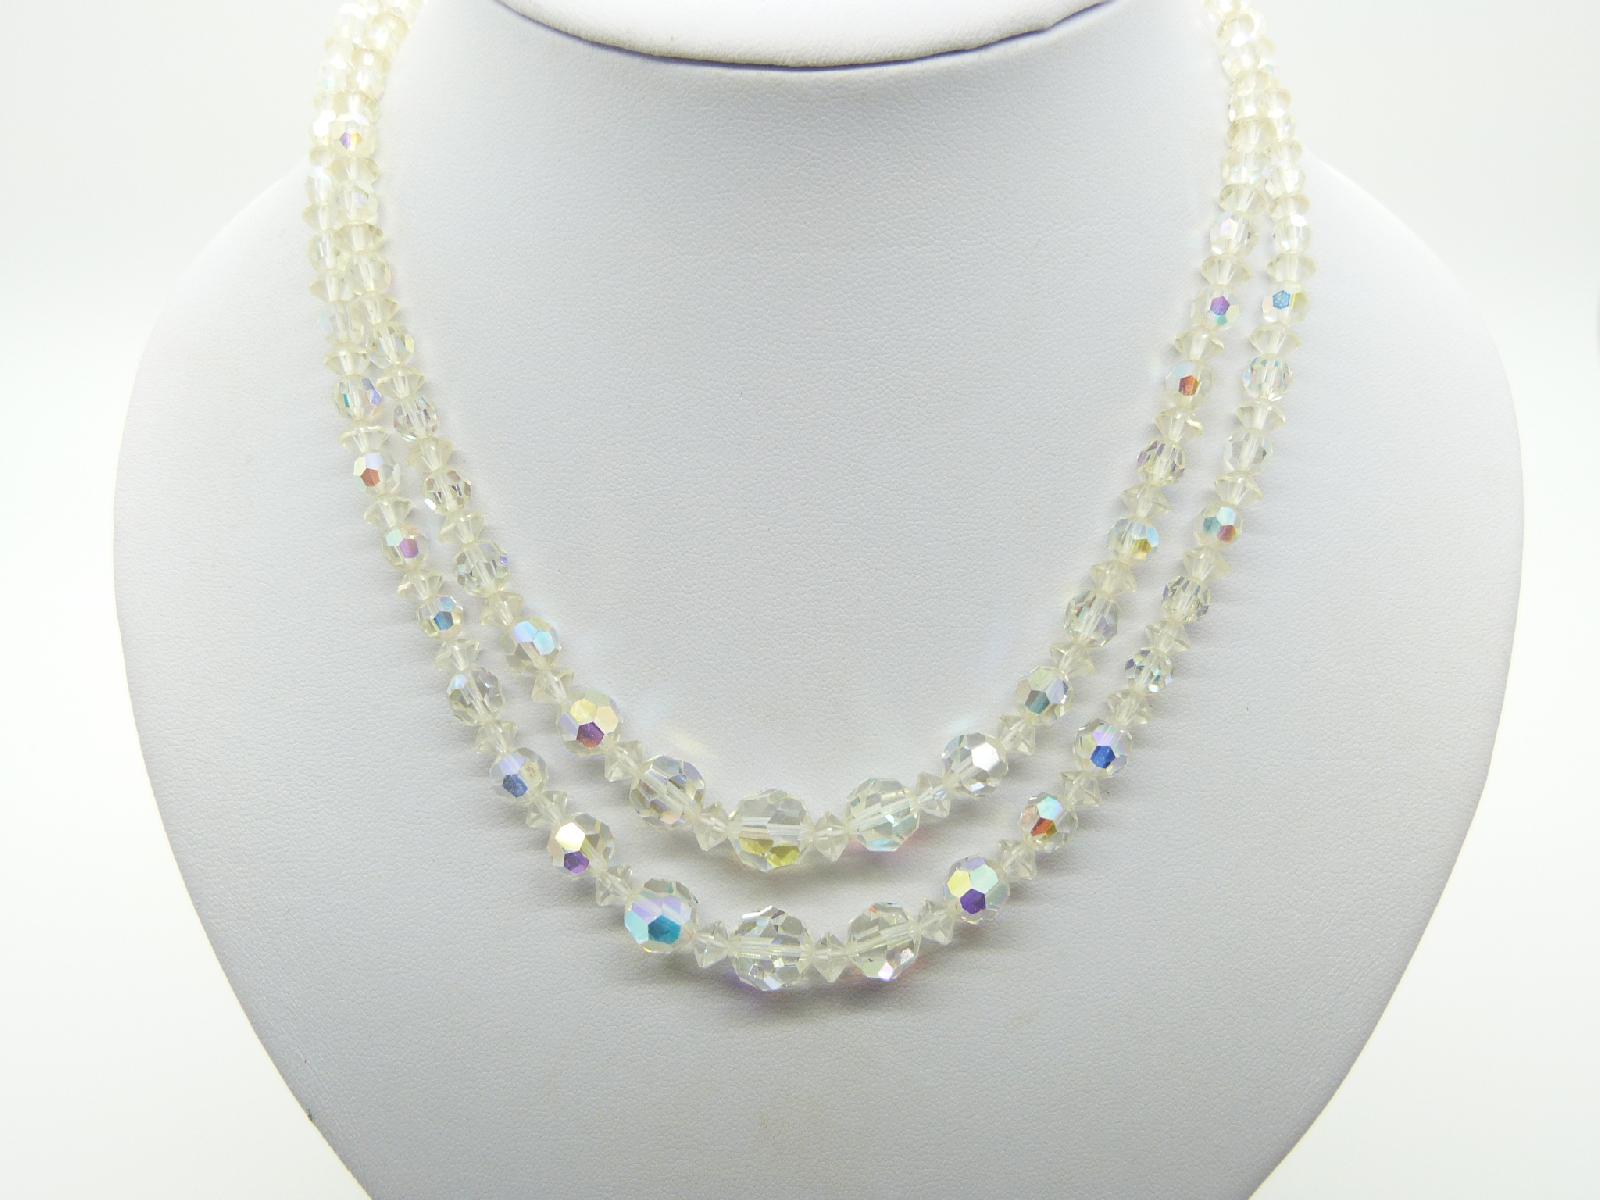 £26.00 - Vintage 50s Two Row AB Crystal Glass Bead Necklace with Diamante Ends